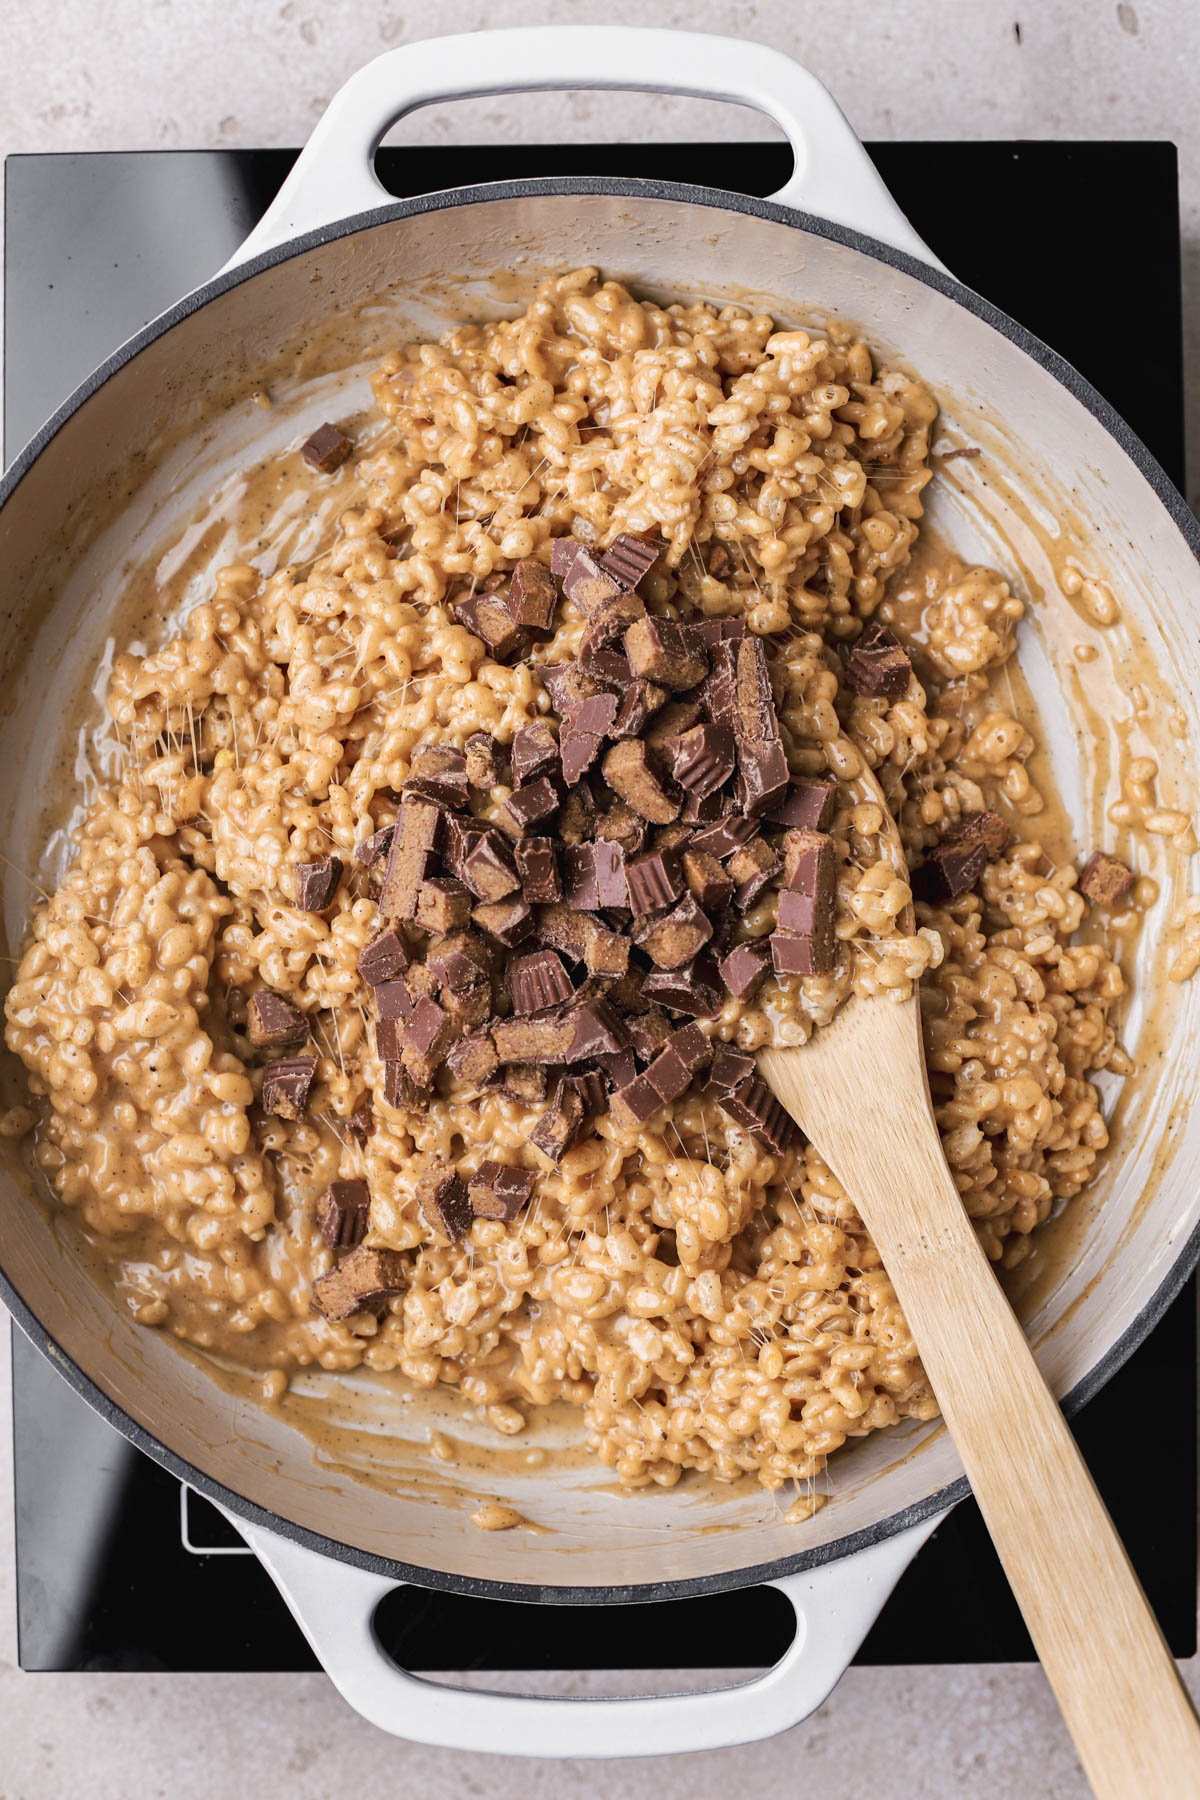 Peanut butter Rice Krispies with Reese's peanut butter cup.  